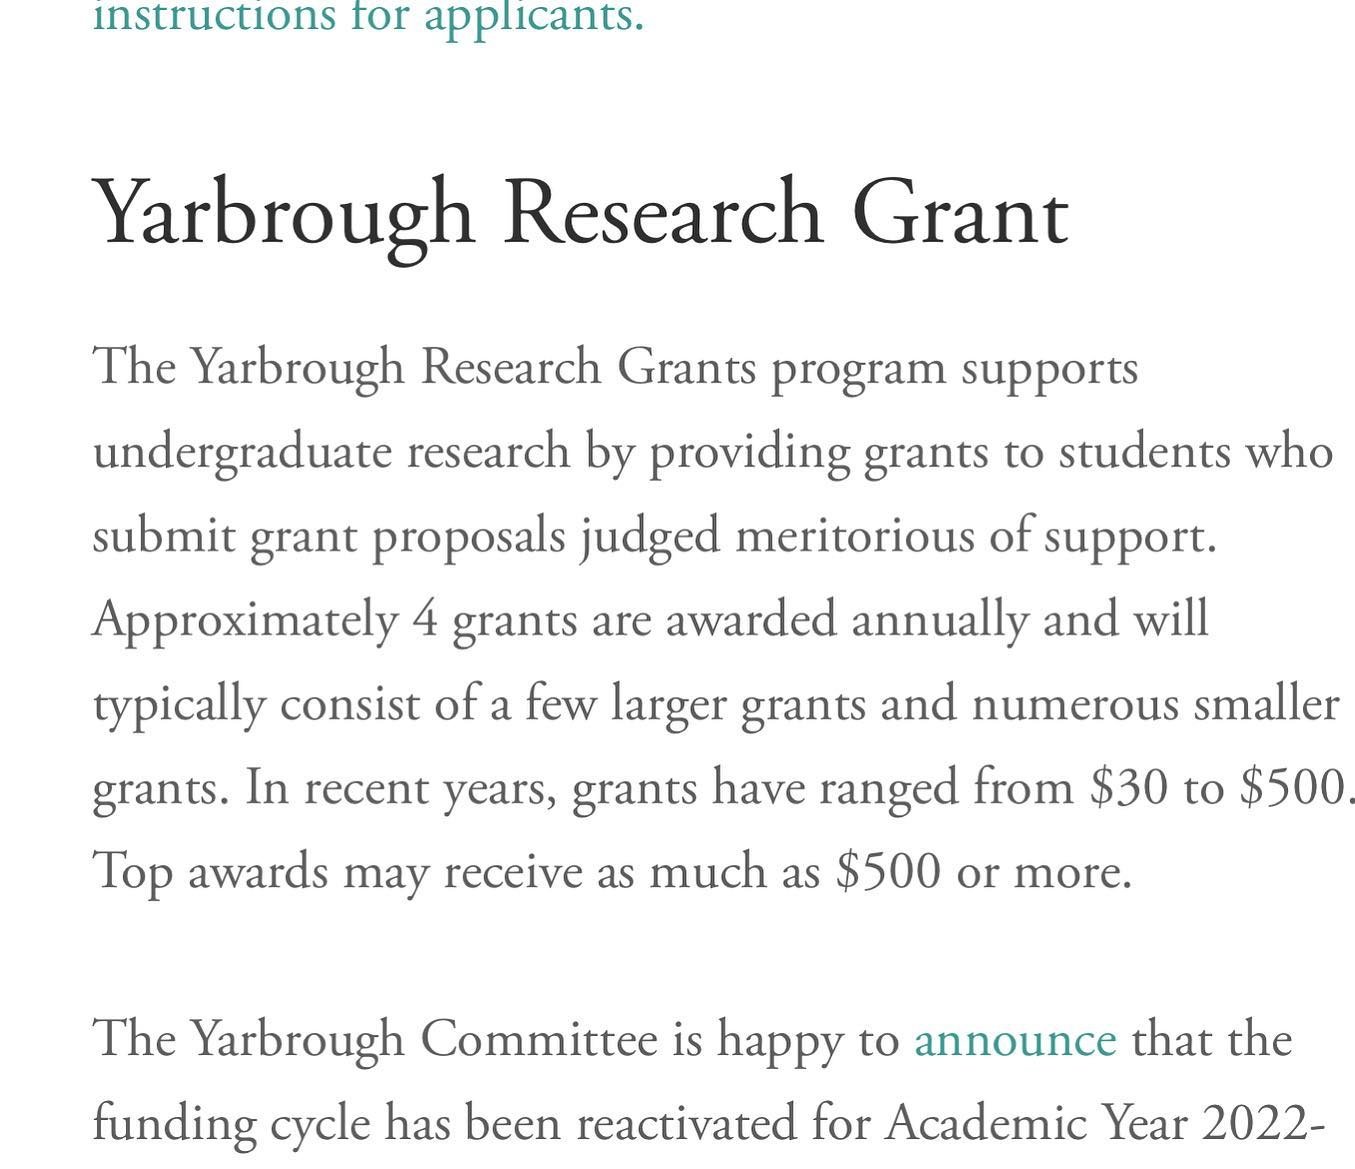 Student researchers: don&rsquo;t forget about the Yarbrough grant opportunity! Applications due April 15th.